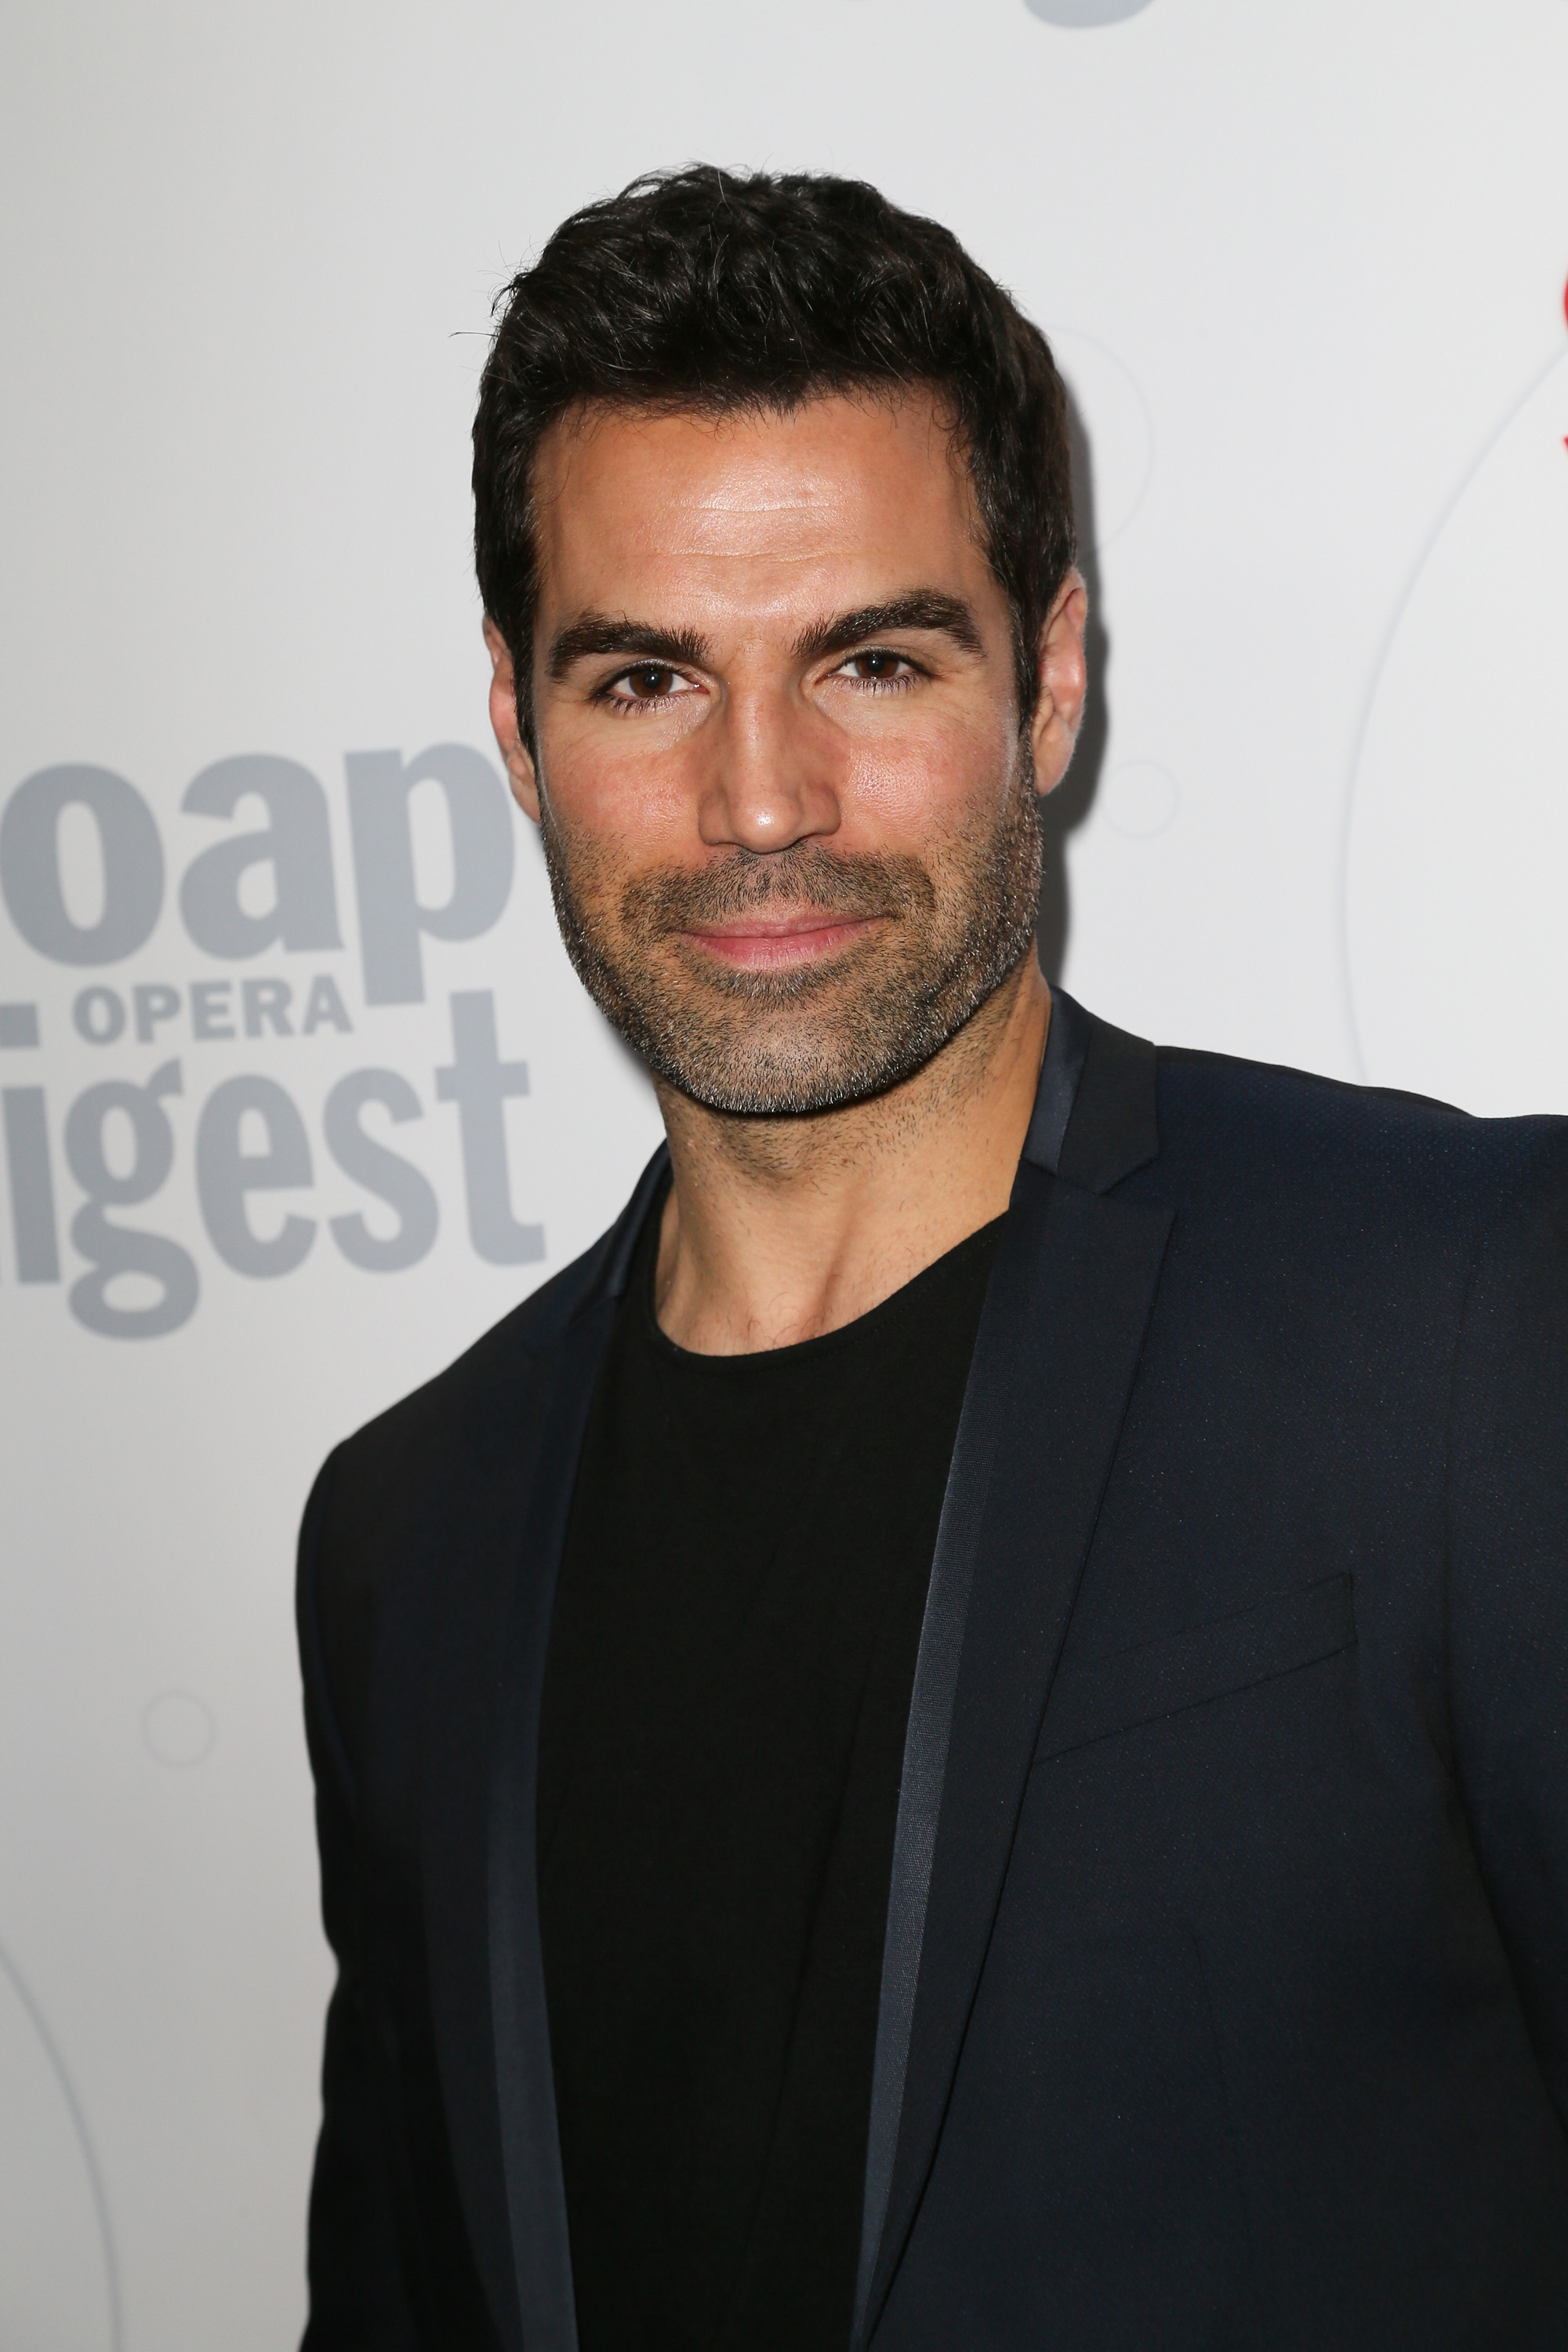 'The Young and the Restless' actor Jordi Vilasuso wearing a black shirt and suit during a red carpet appearance.